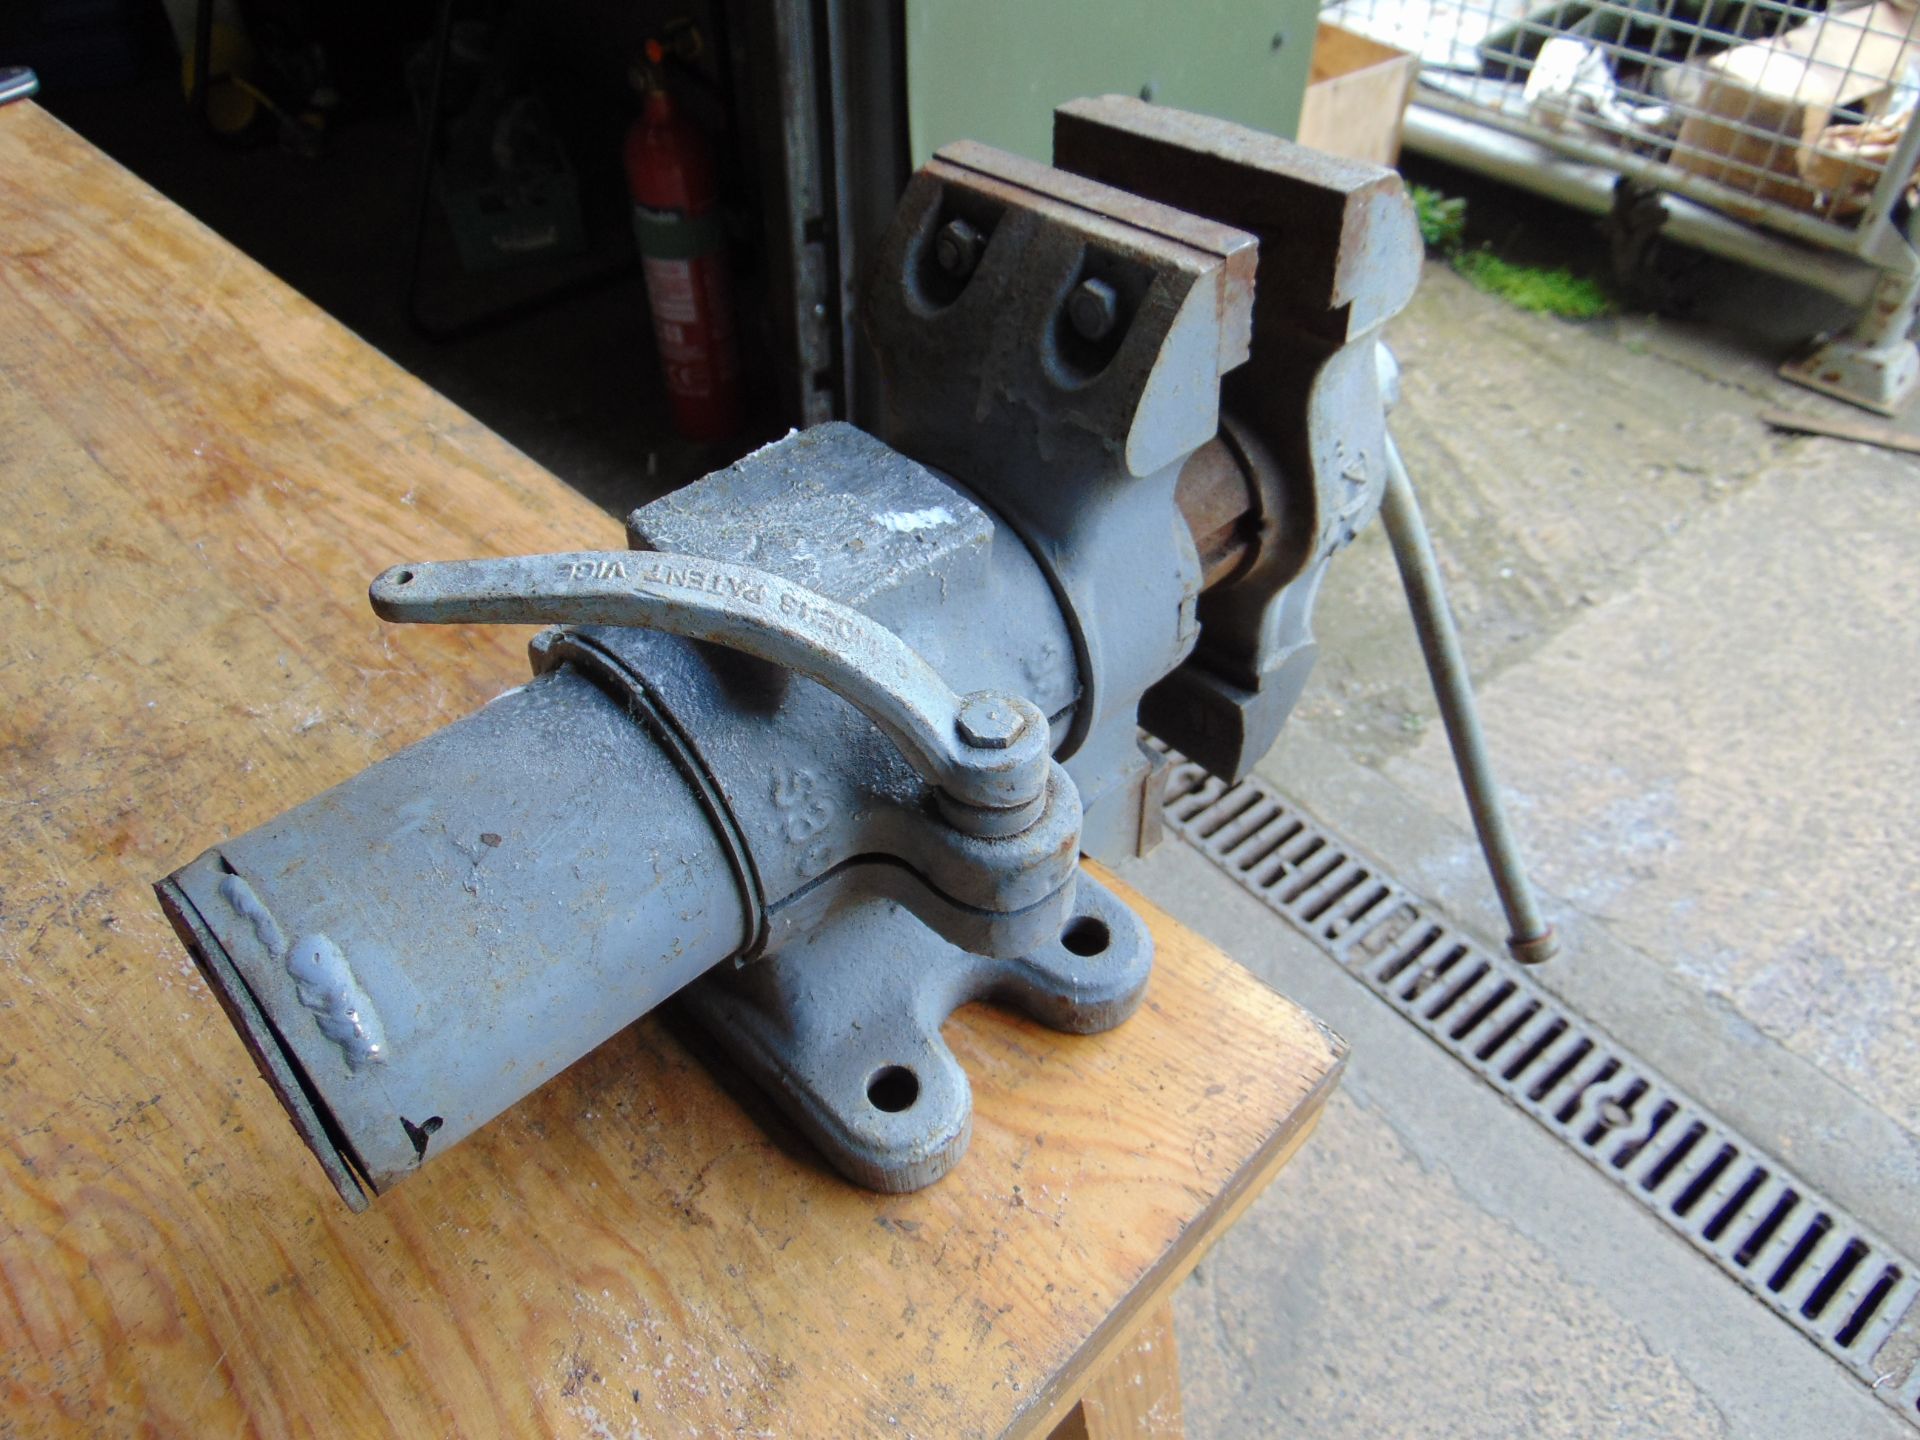 Swindens Patent Double Jaw Revolving Bench Vice - Image 5 of 17